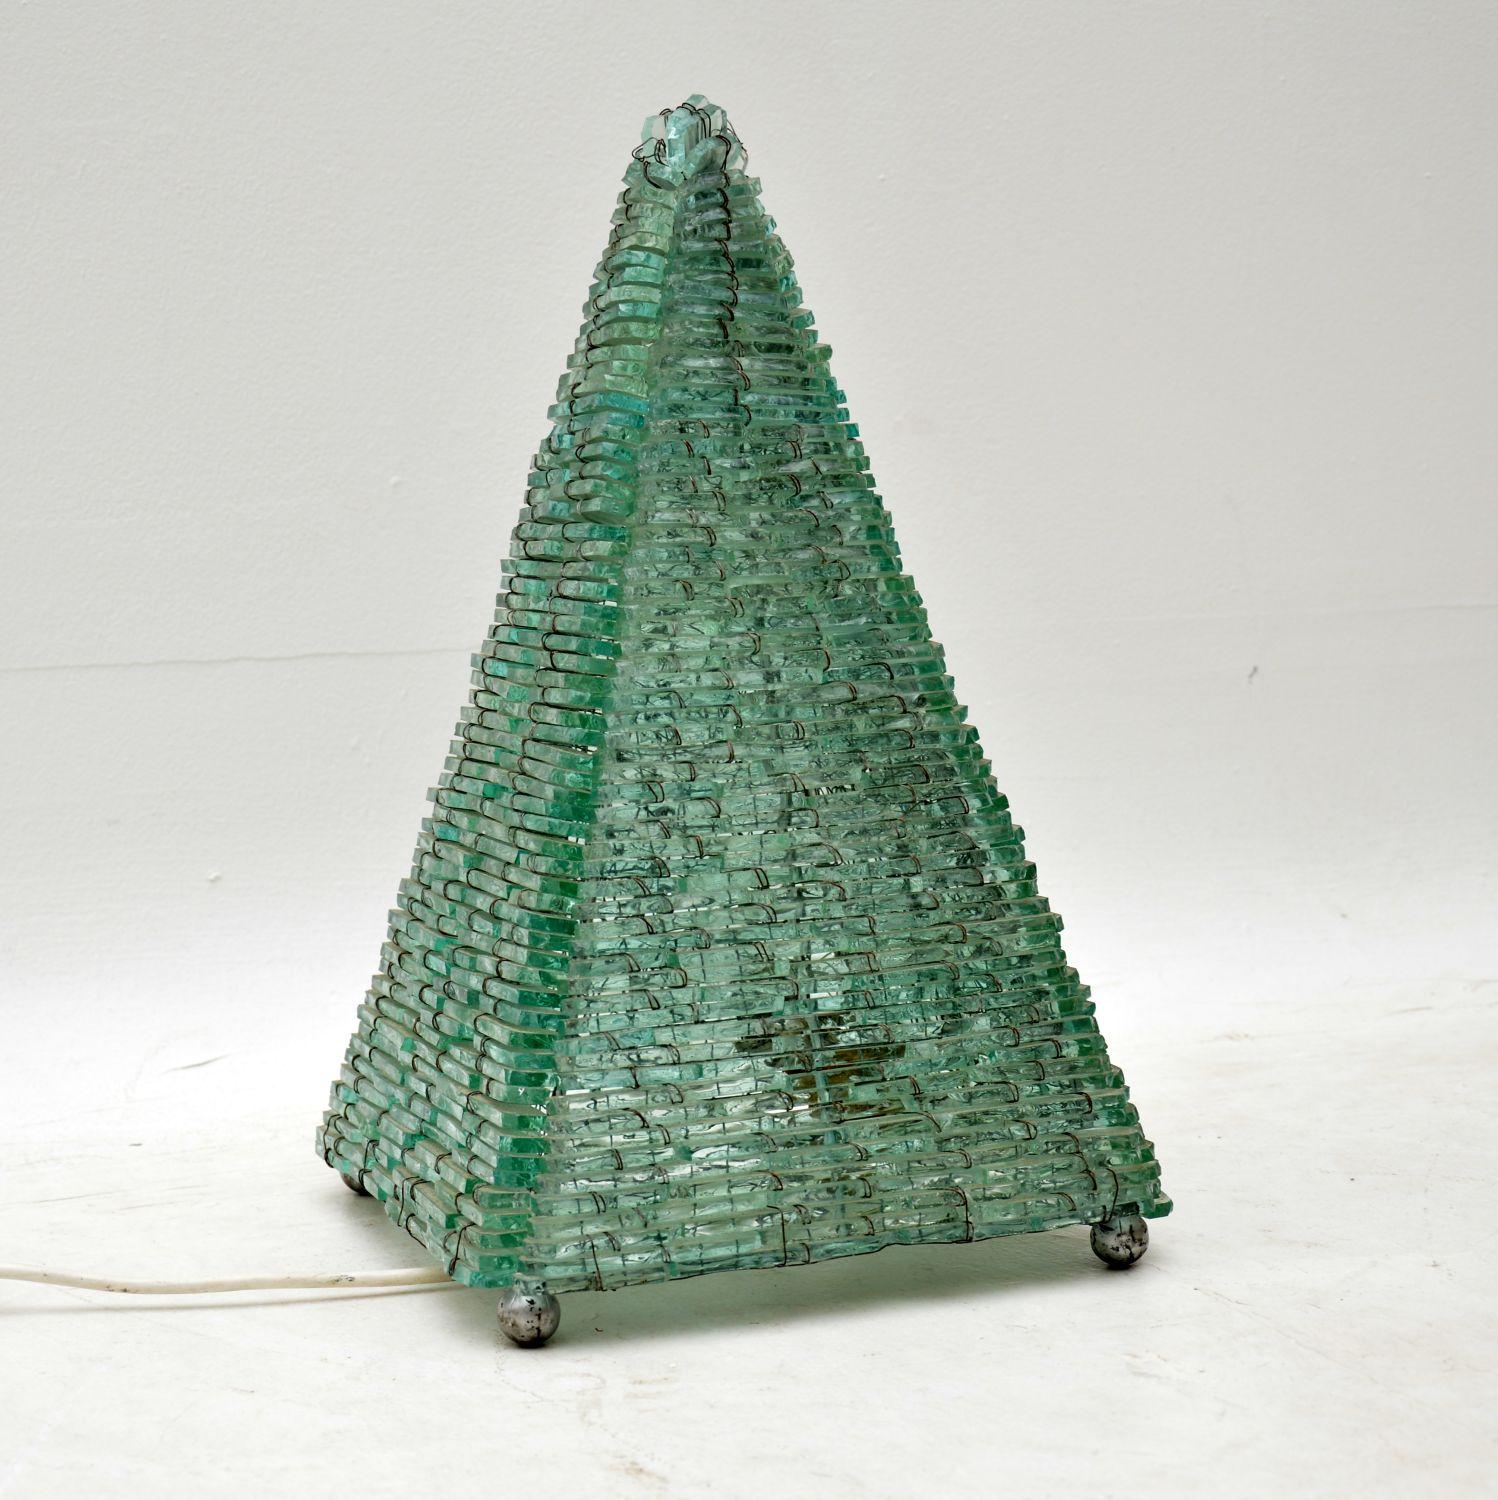 A beautiful and intricate vintage glass pyramid table lamp, made in France and dating from the 1960s. This is in excellent condition, it’s in good working order and has been PAT tested for safety.

Measures: Width 26 cm, 10 inches
Depth 26 cm, 10